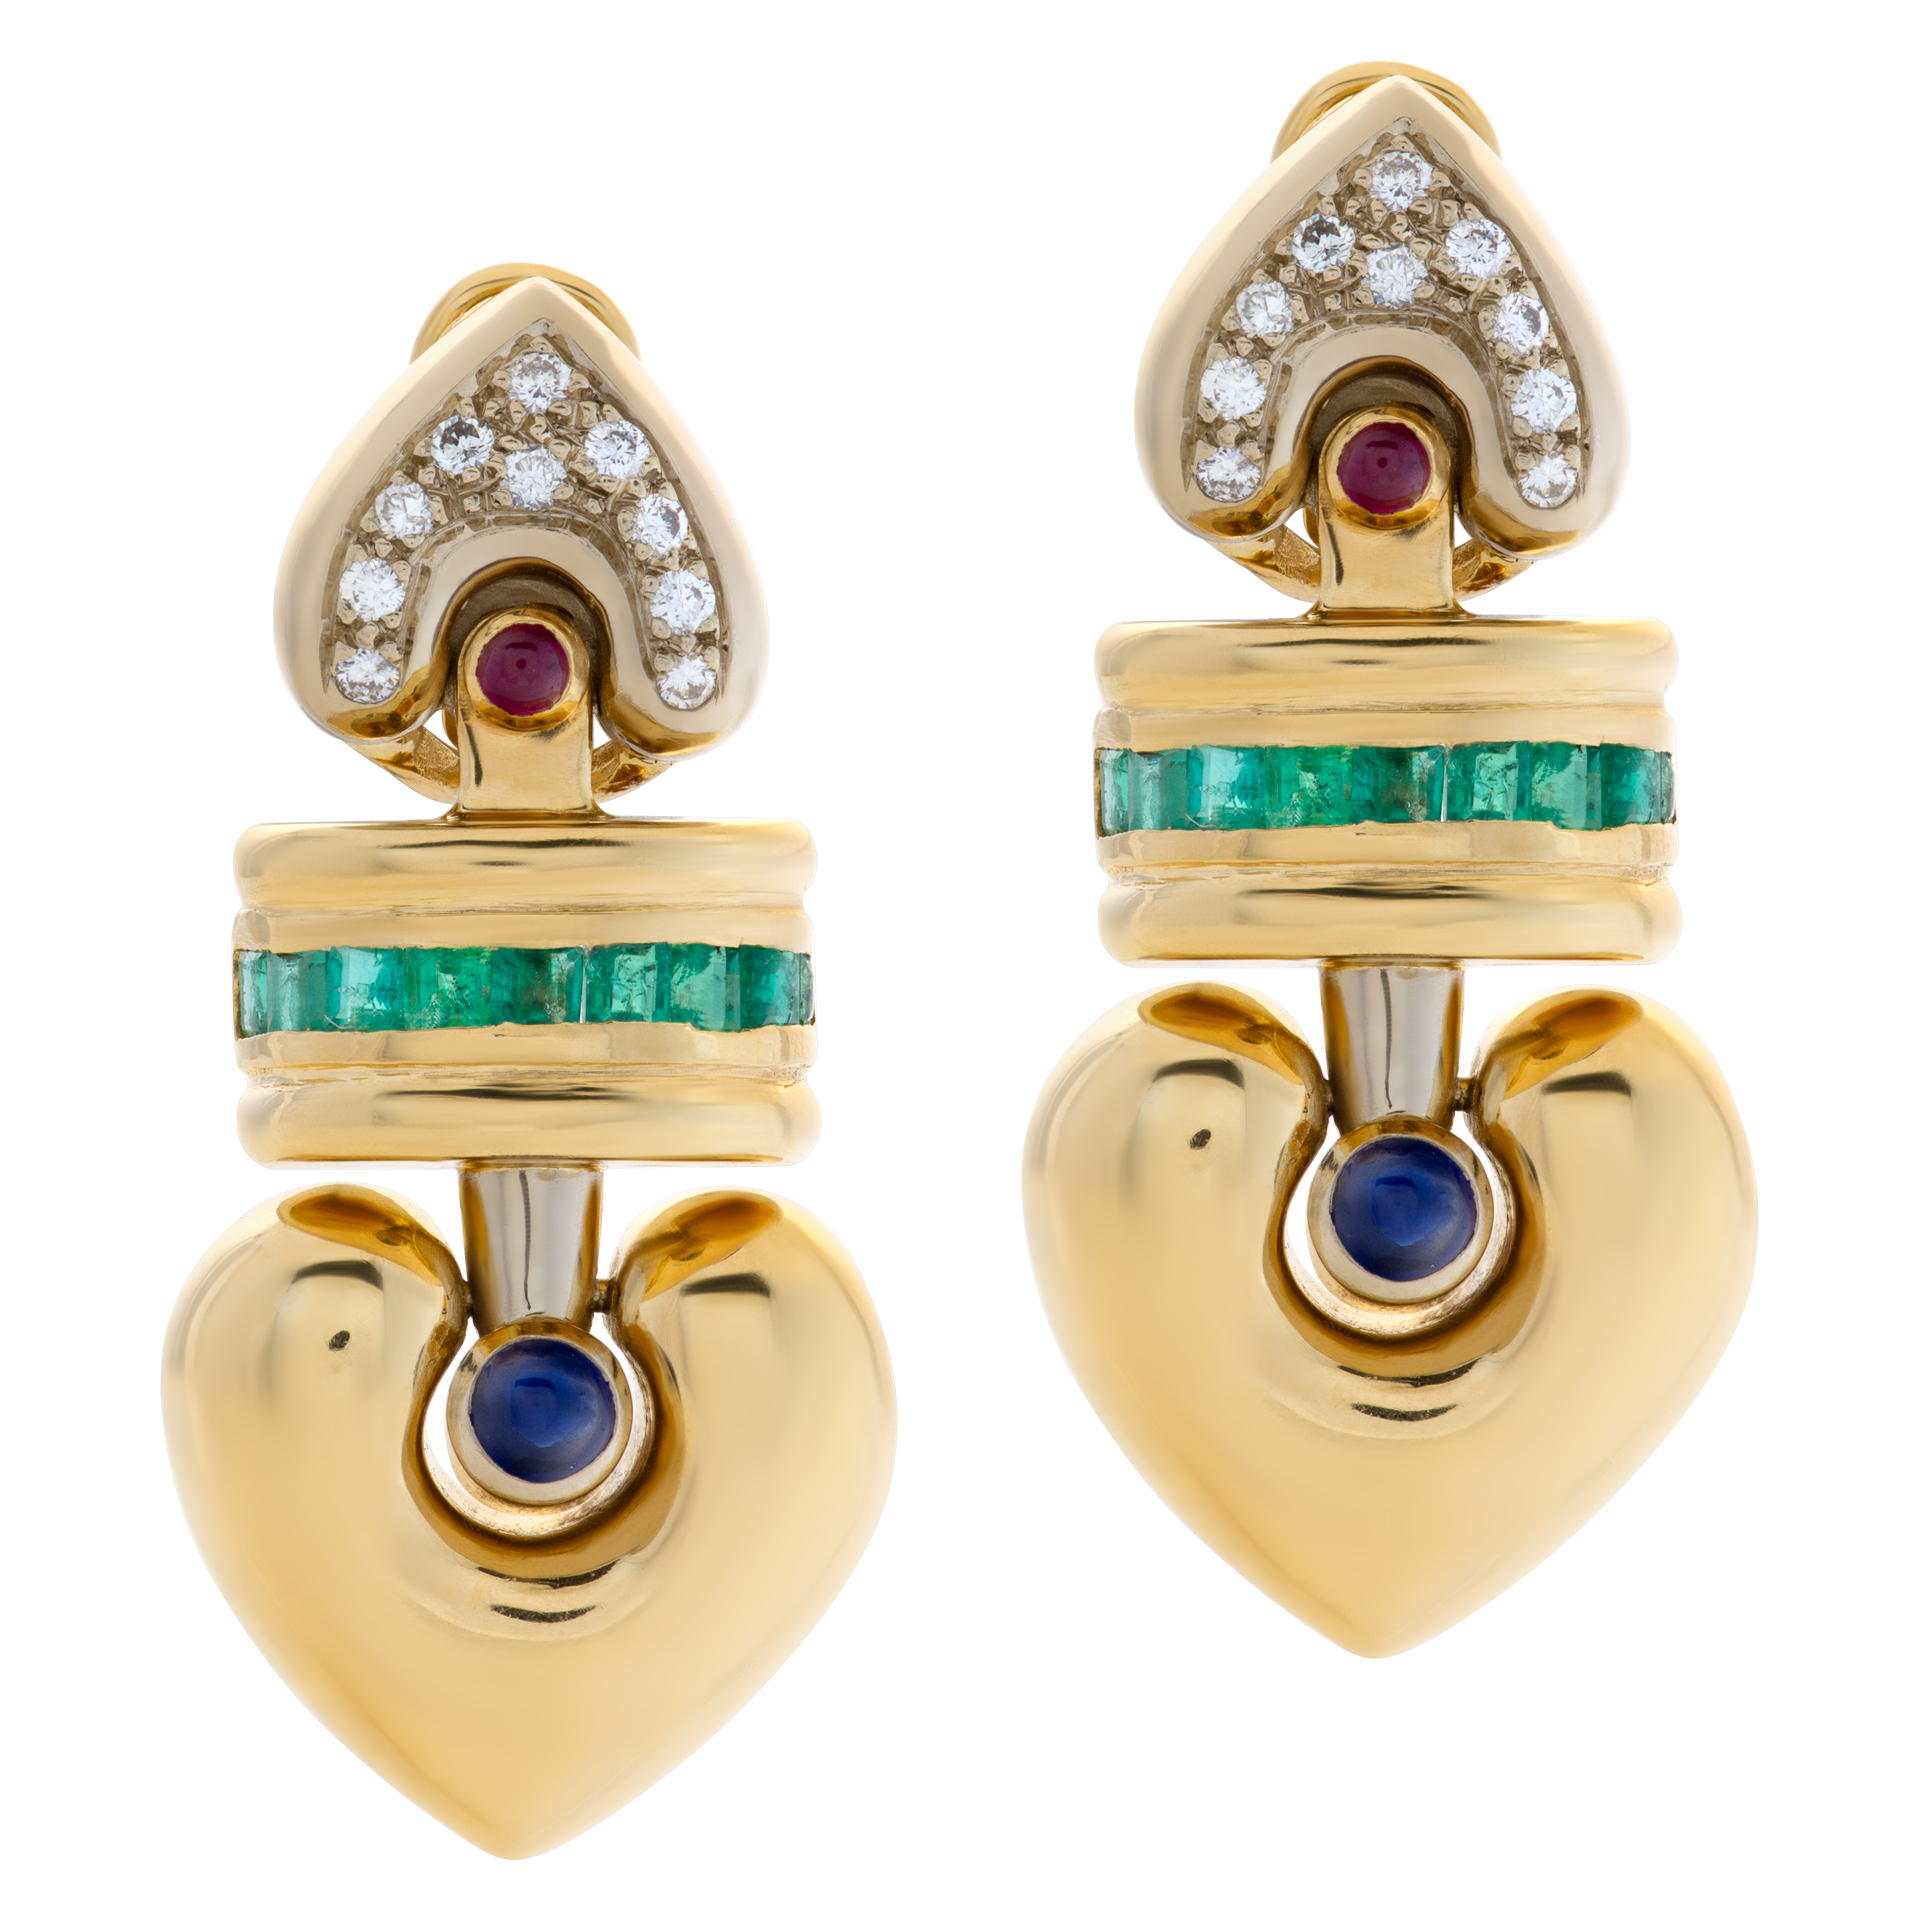 Heart earrings with diamonds, rubies, emeralds and sapphires image 1